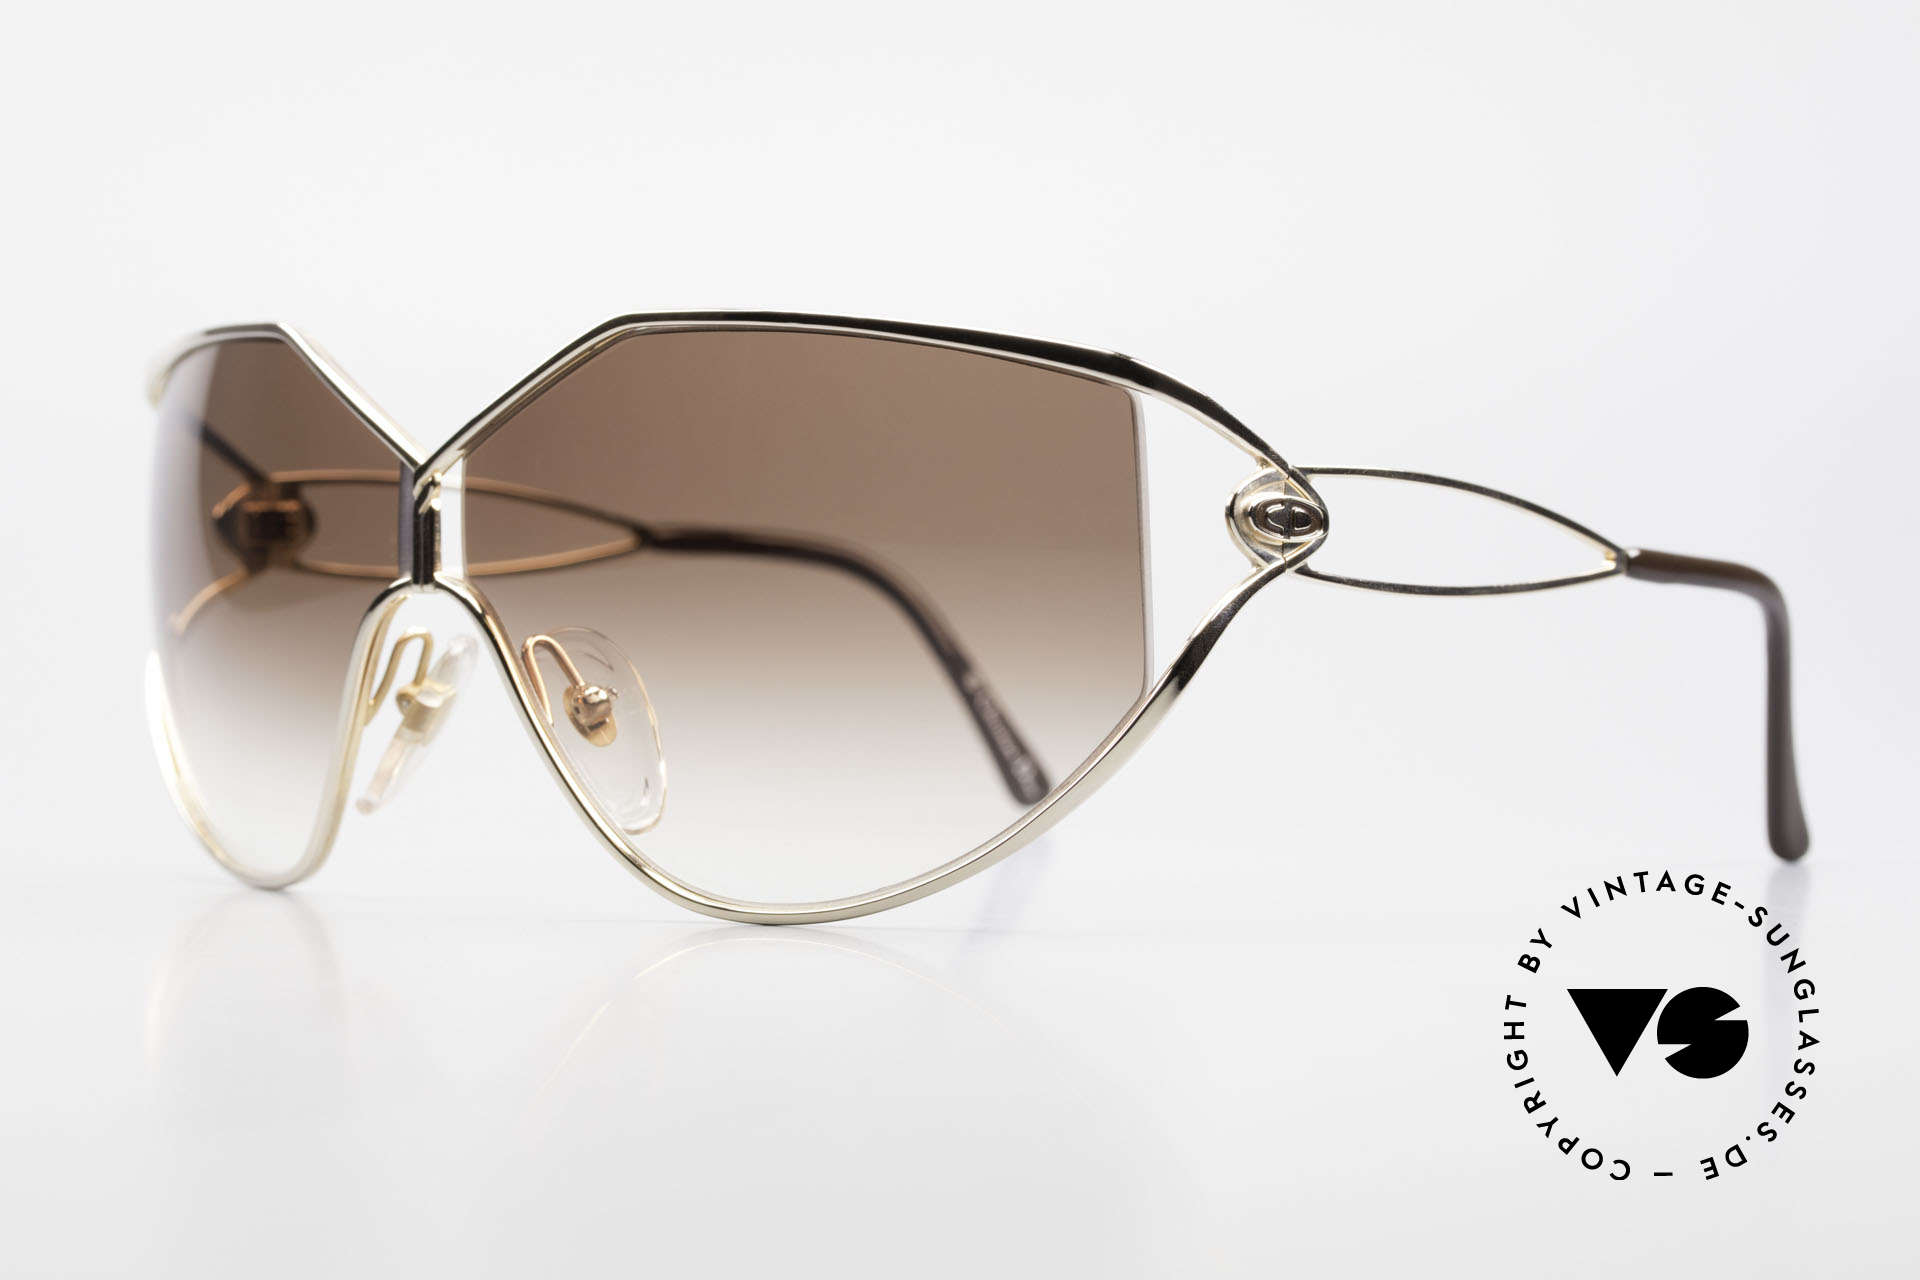 Christian Dior 2345 Ladies 90s Designer Sunglasses, the costly frame is GOLD-PLATED (très chic), Made for Women